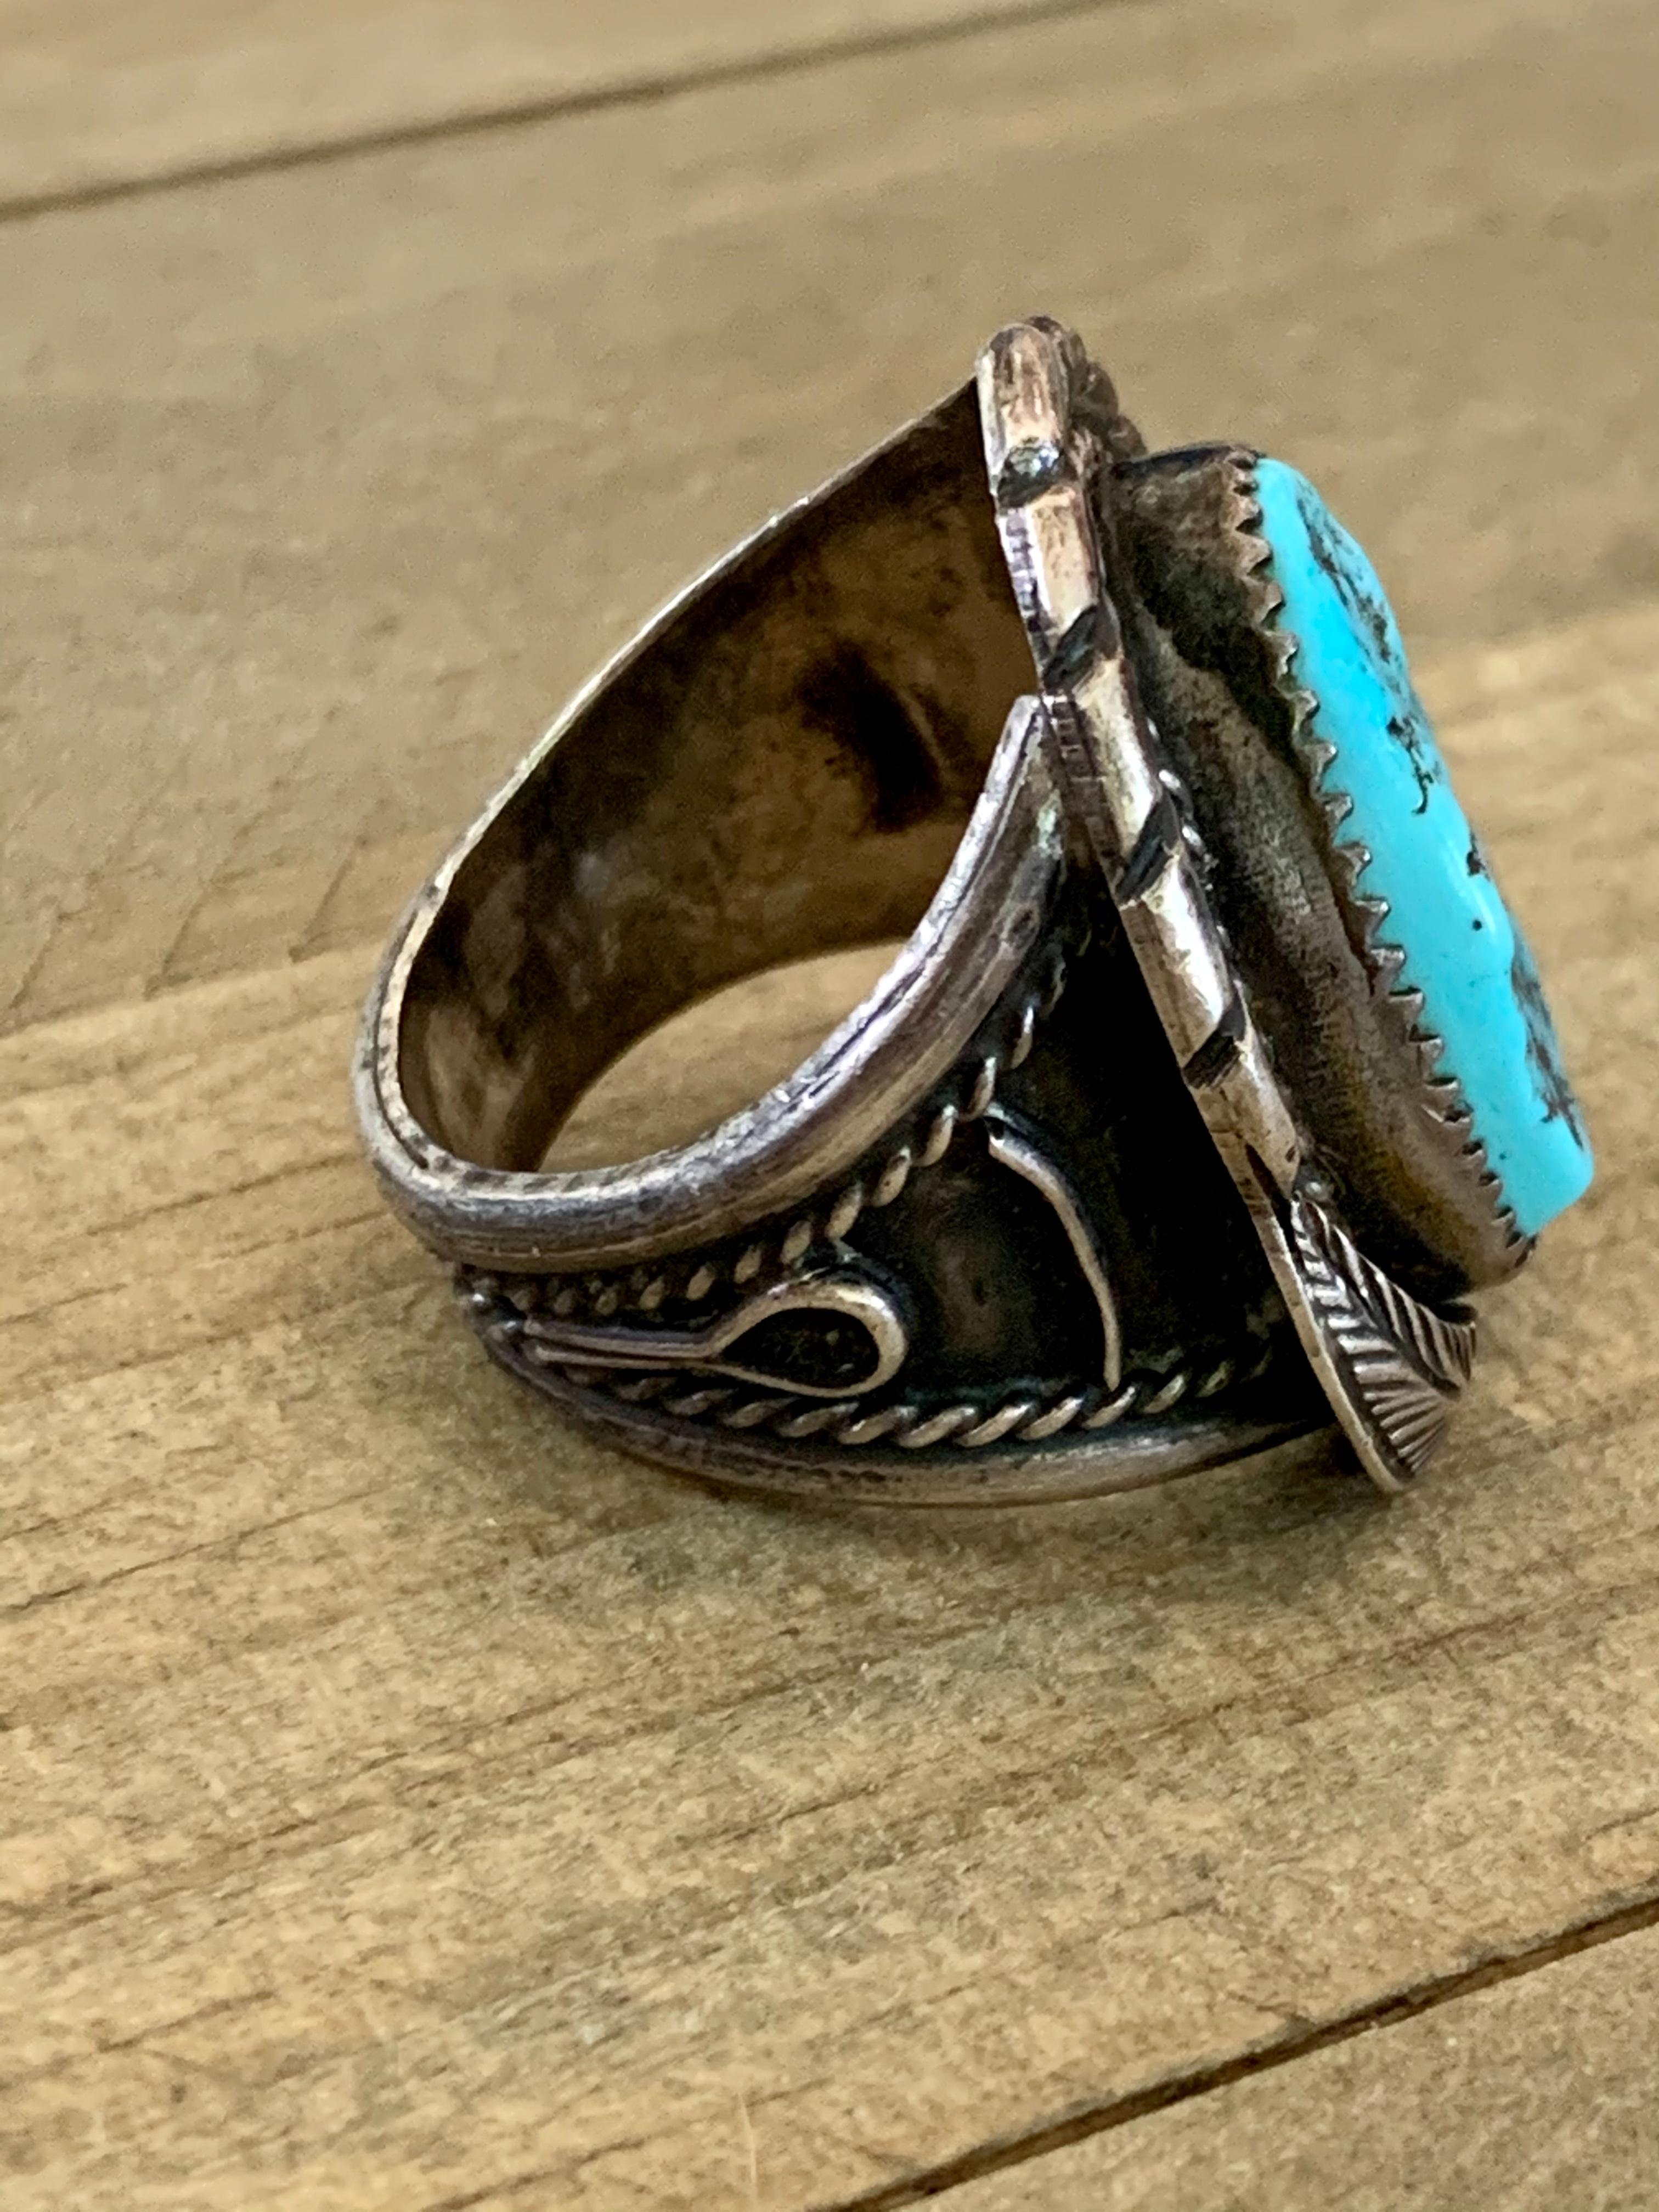 This vintage Navajo Sterling Silver ring features a brilliant blue Turquoise stone.

The ring measures 1-1/8